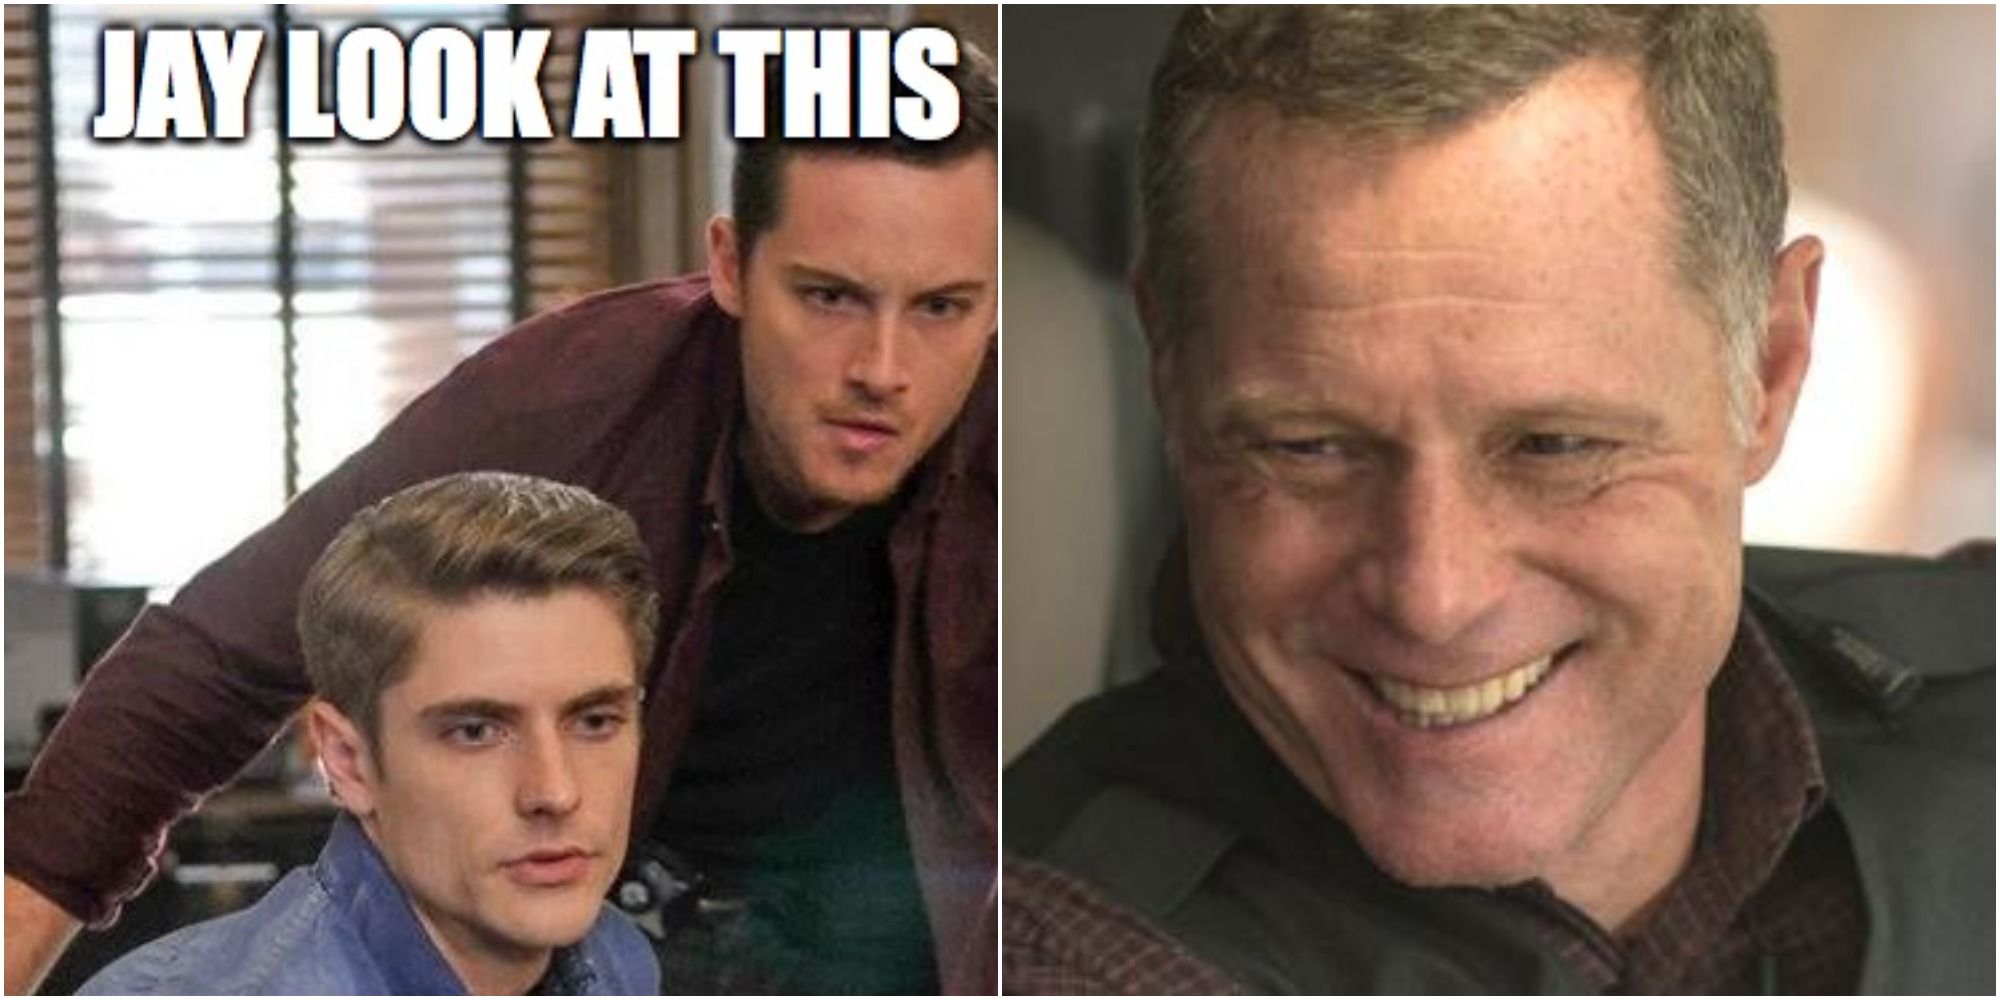 Chicago PD Memes That Are Too Hilarious For Words